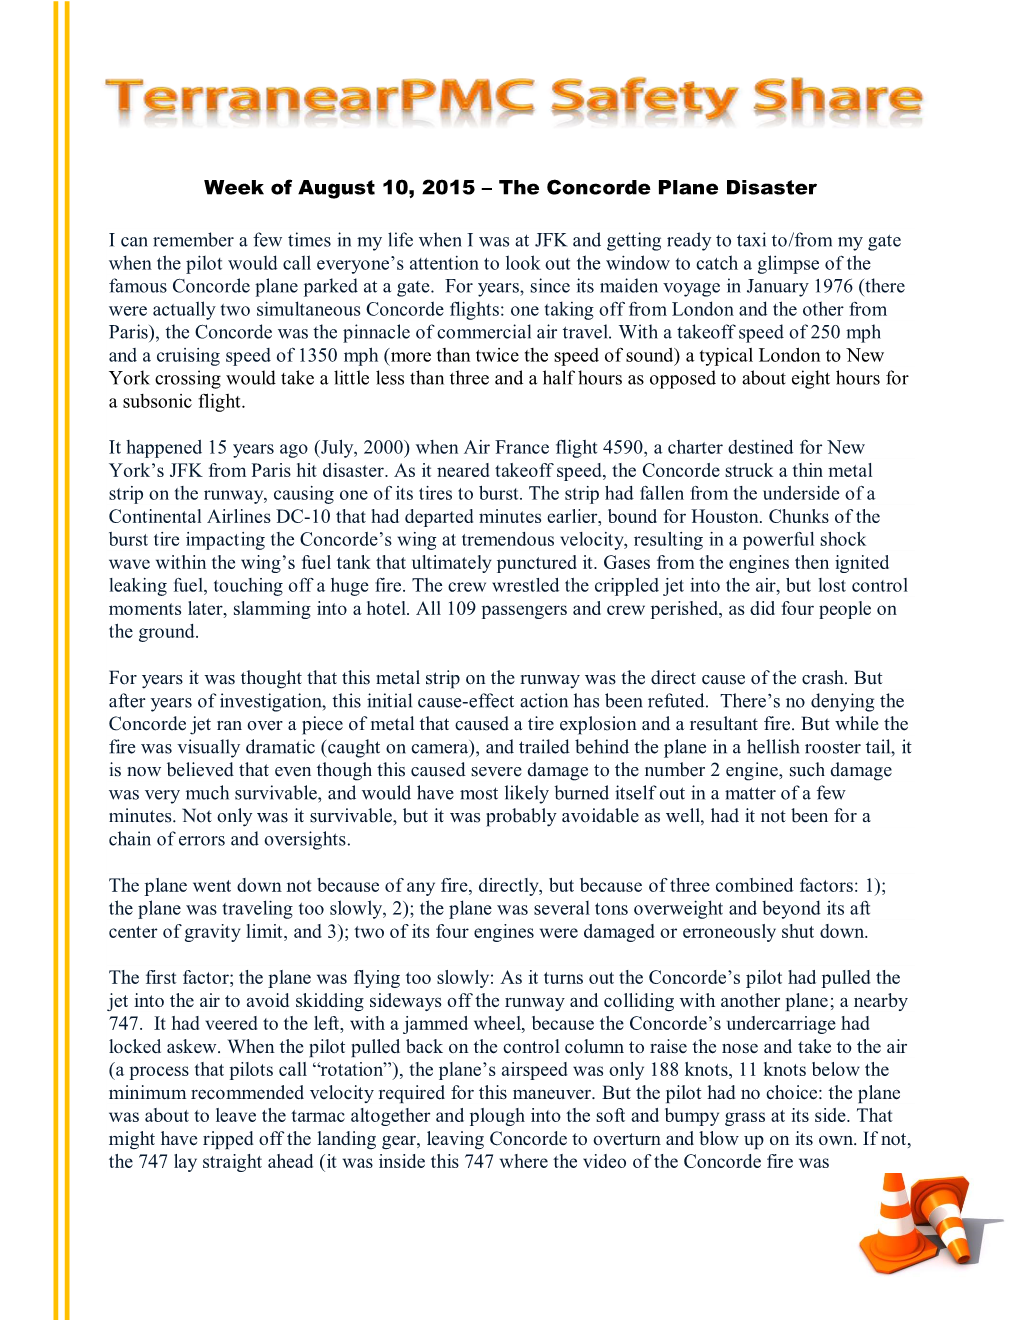 Week of August 10, 2015 – the Concorde Plane Disaster I Can